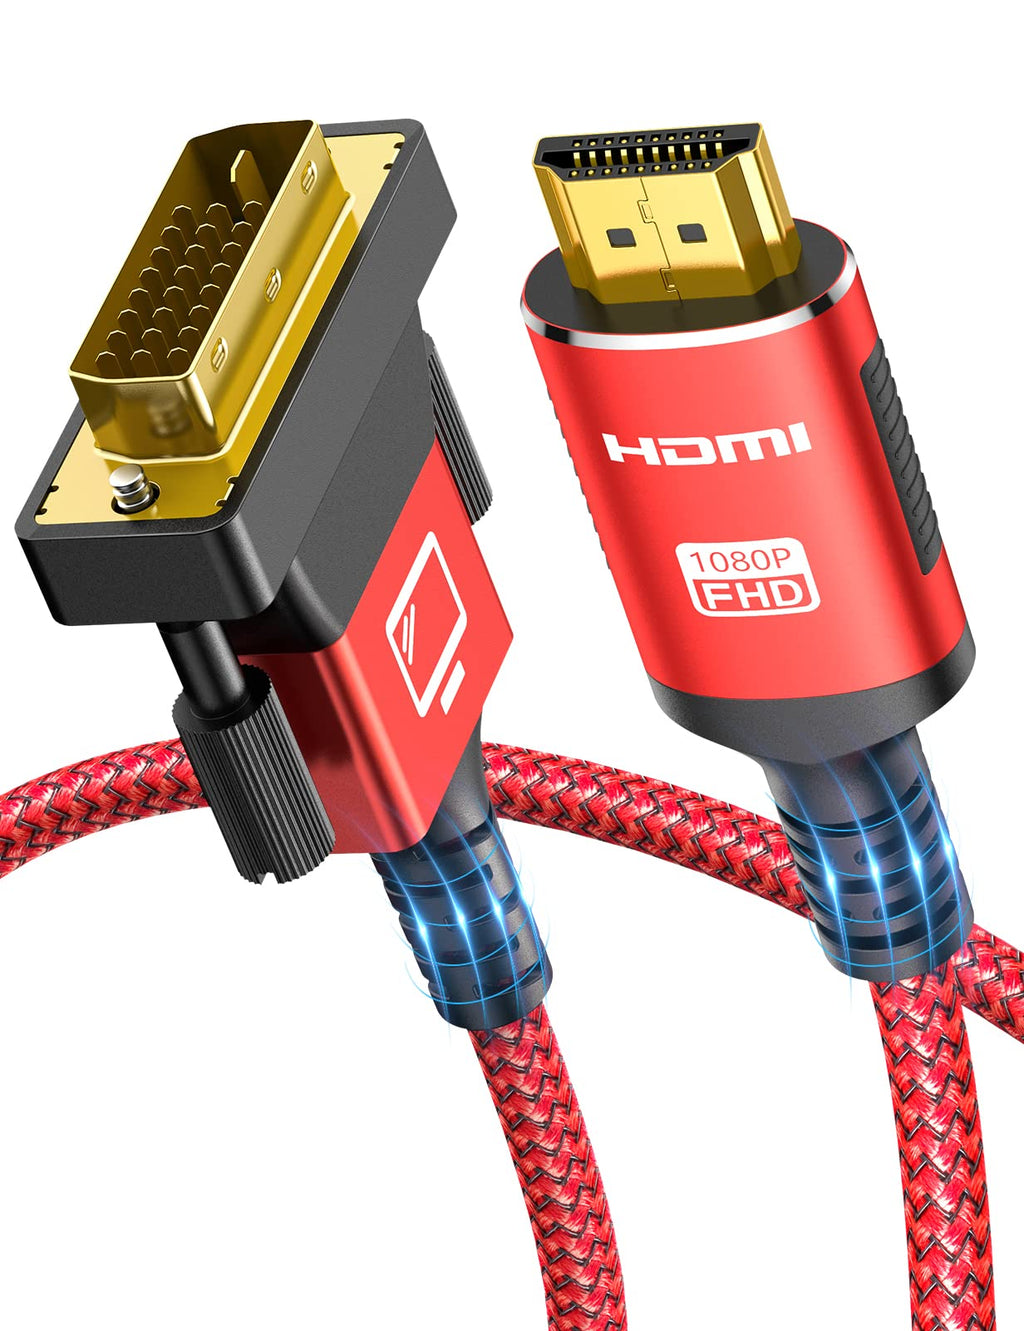 HDMI to DVI Cable 10FT, High-Speed Bi-Directional DVI-D 24+1 Male to HDMI Male 1080P Nylon Braid Cable,Gold-Plated Adapter,Aluminum Shell,Compatible PC,Blu-Ray,PS3/4/5 and More 10feet Red